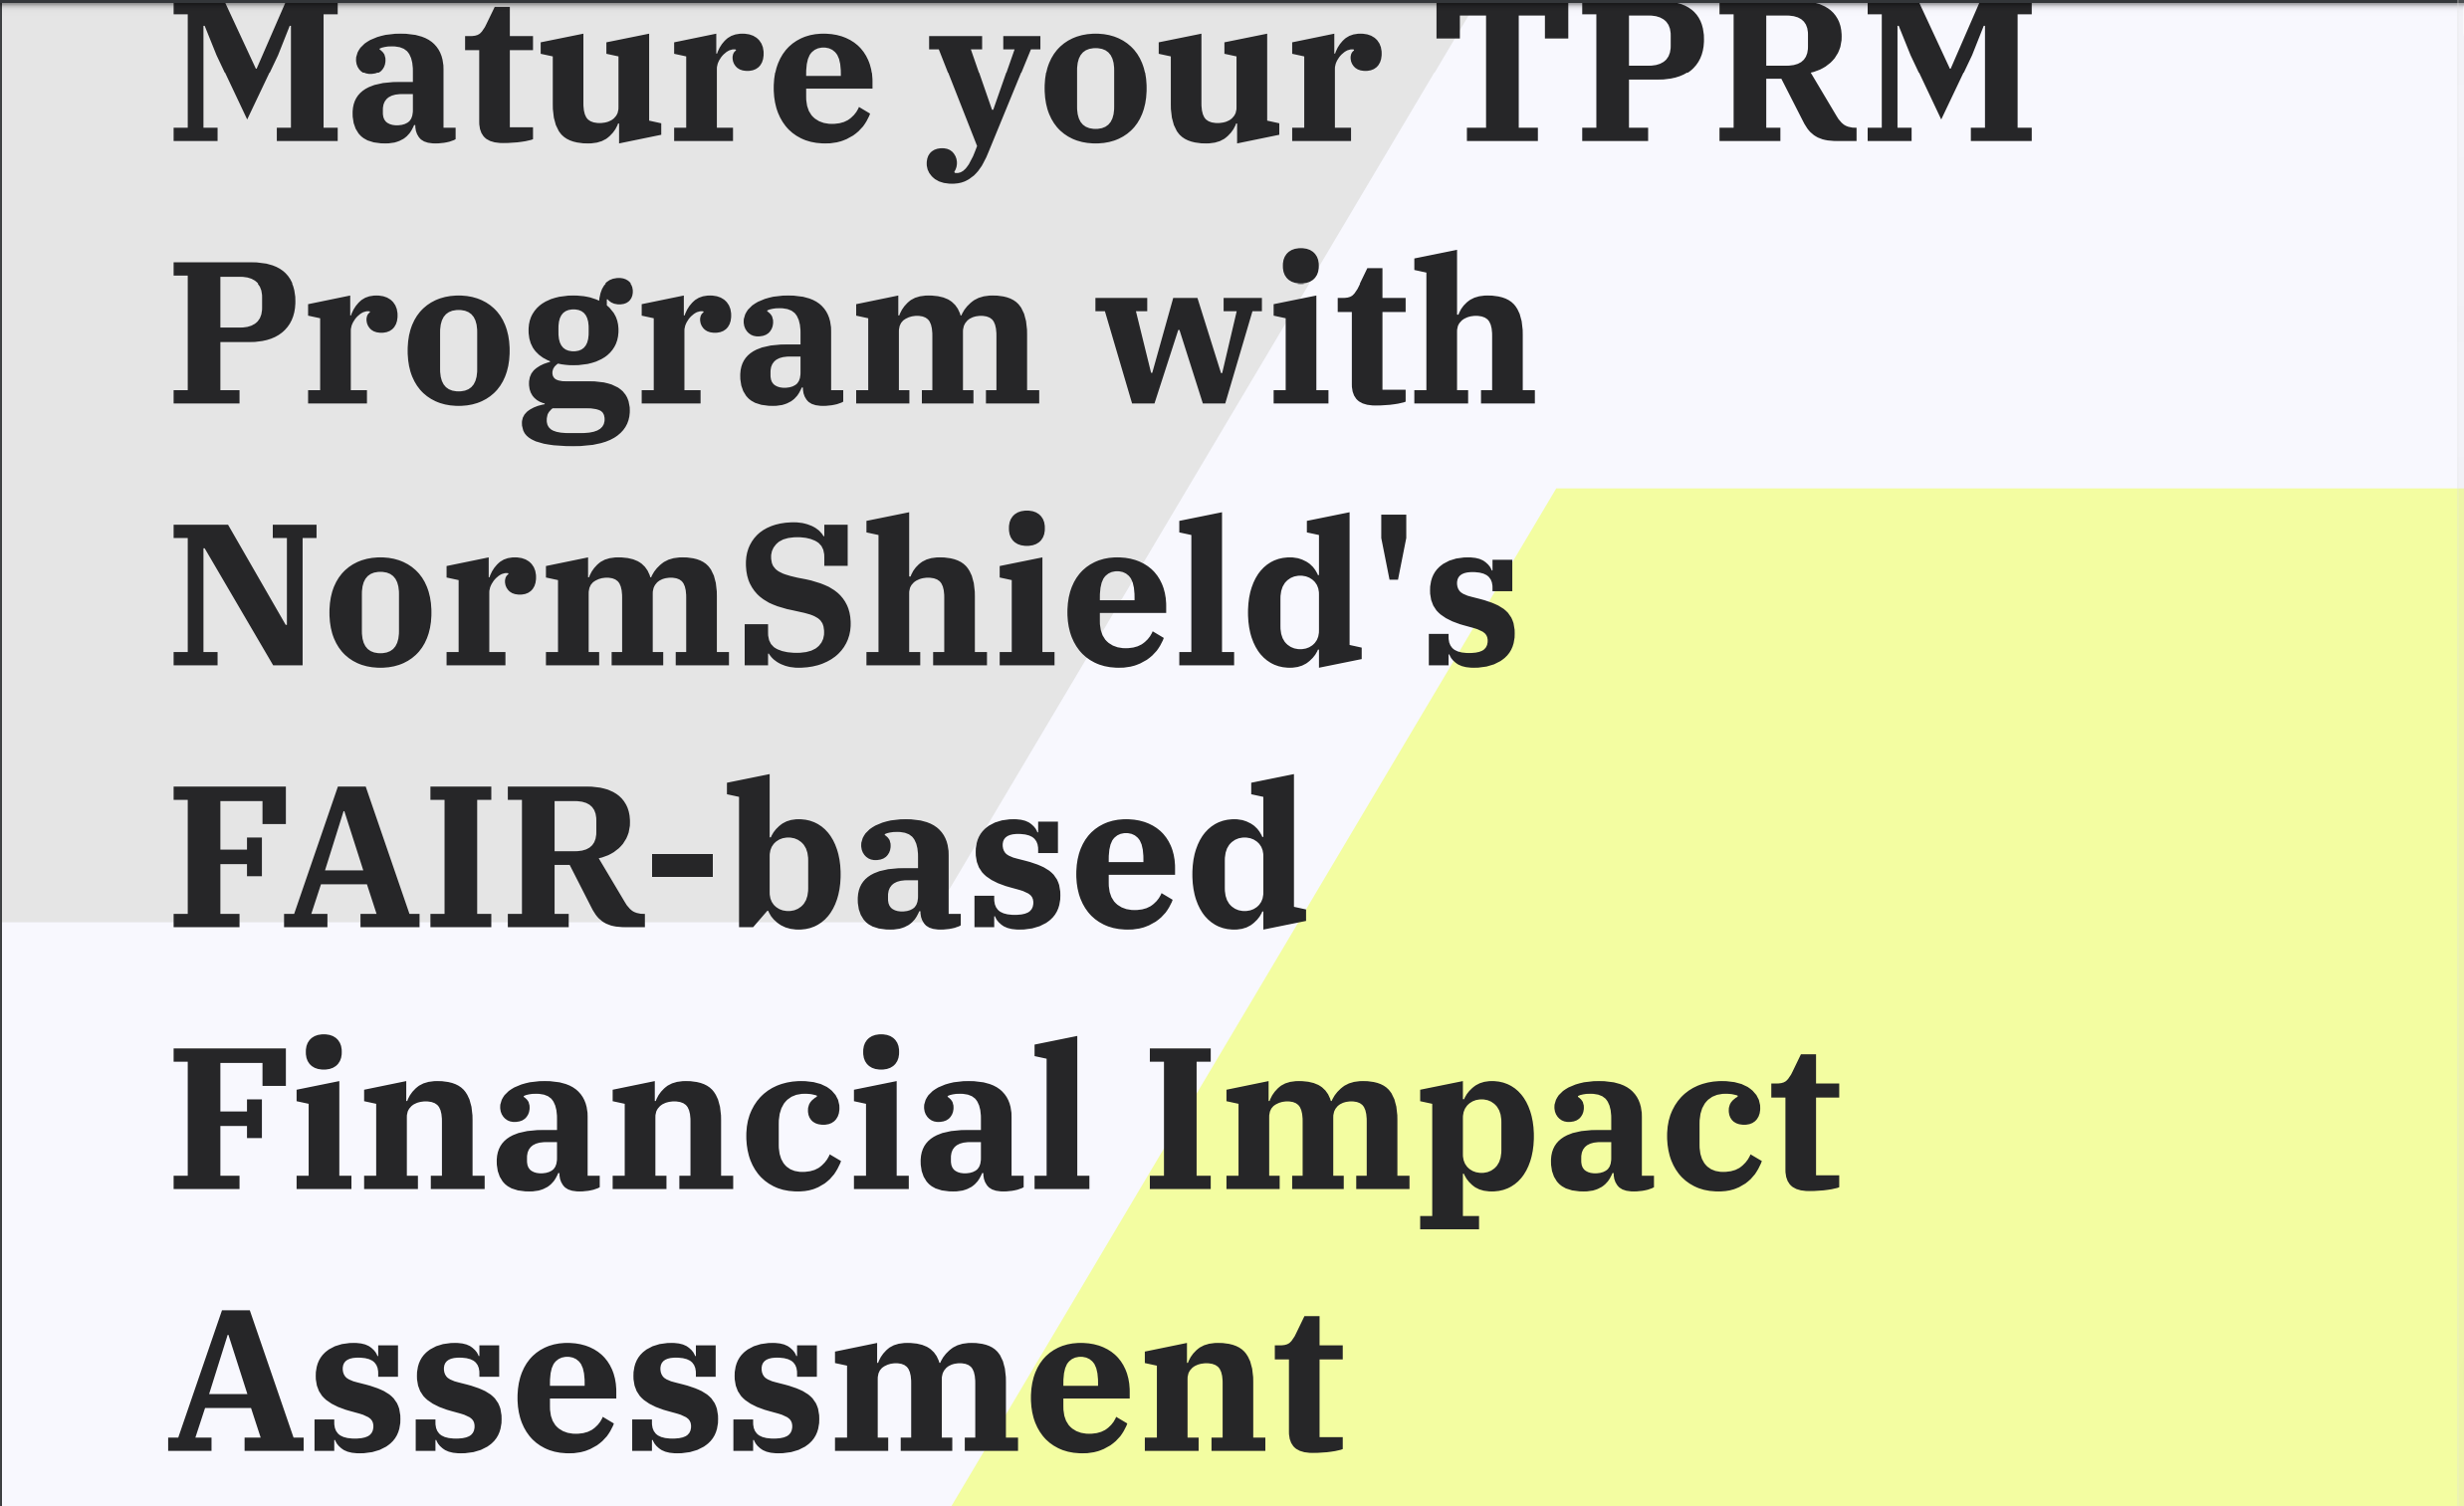 Mature your TPRM Program with Black Kite’s FAIR-based Financial Impact Assessment